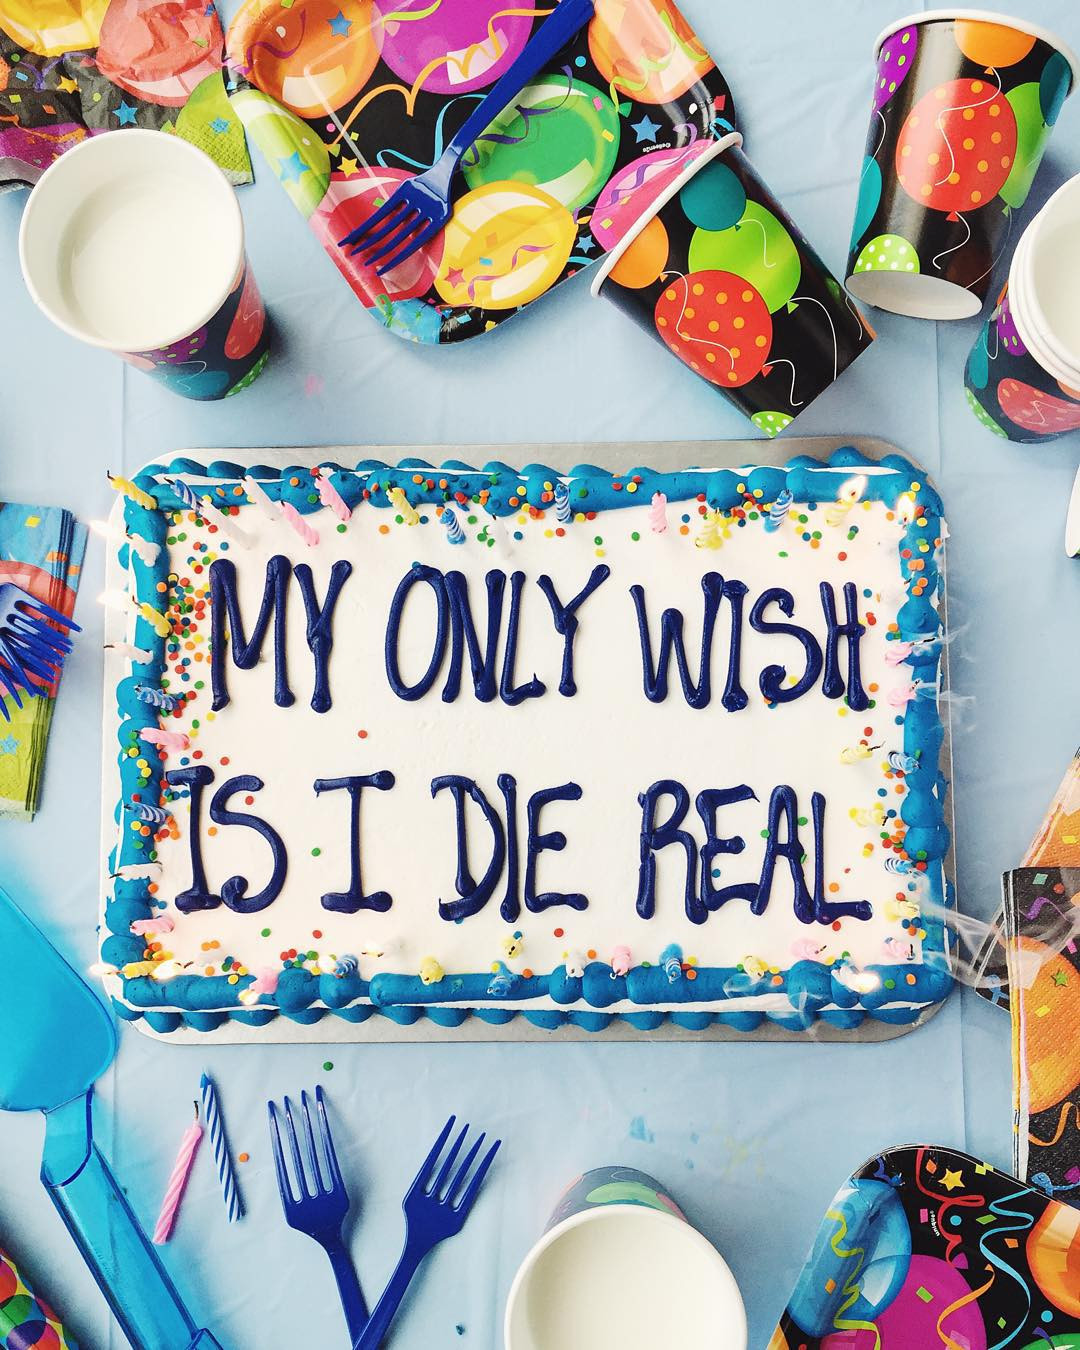 Drake Birthday Quotes
 Drake on Cake is About to Be e Your New Favorite